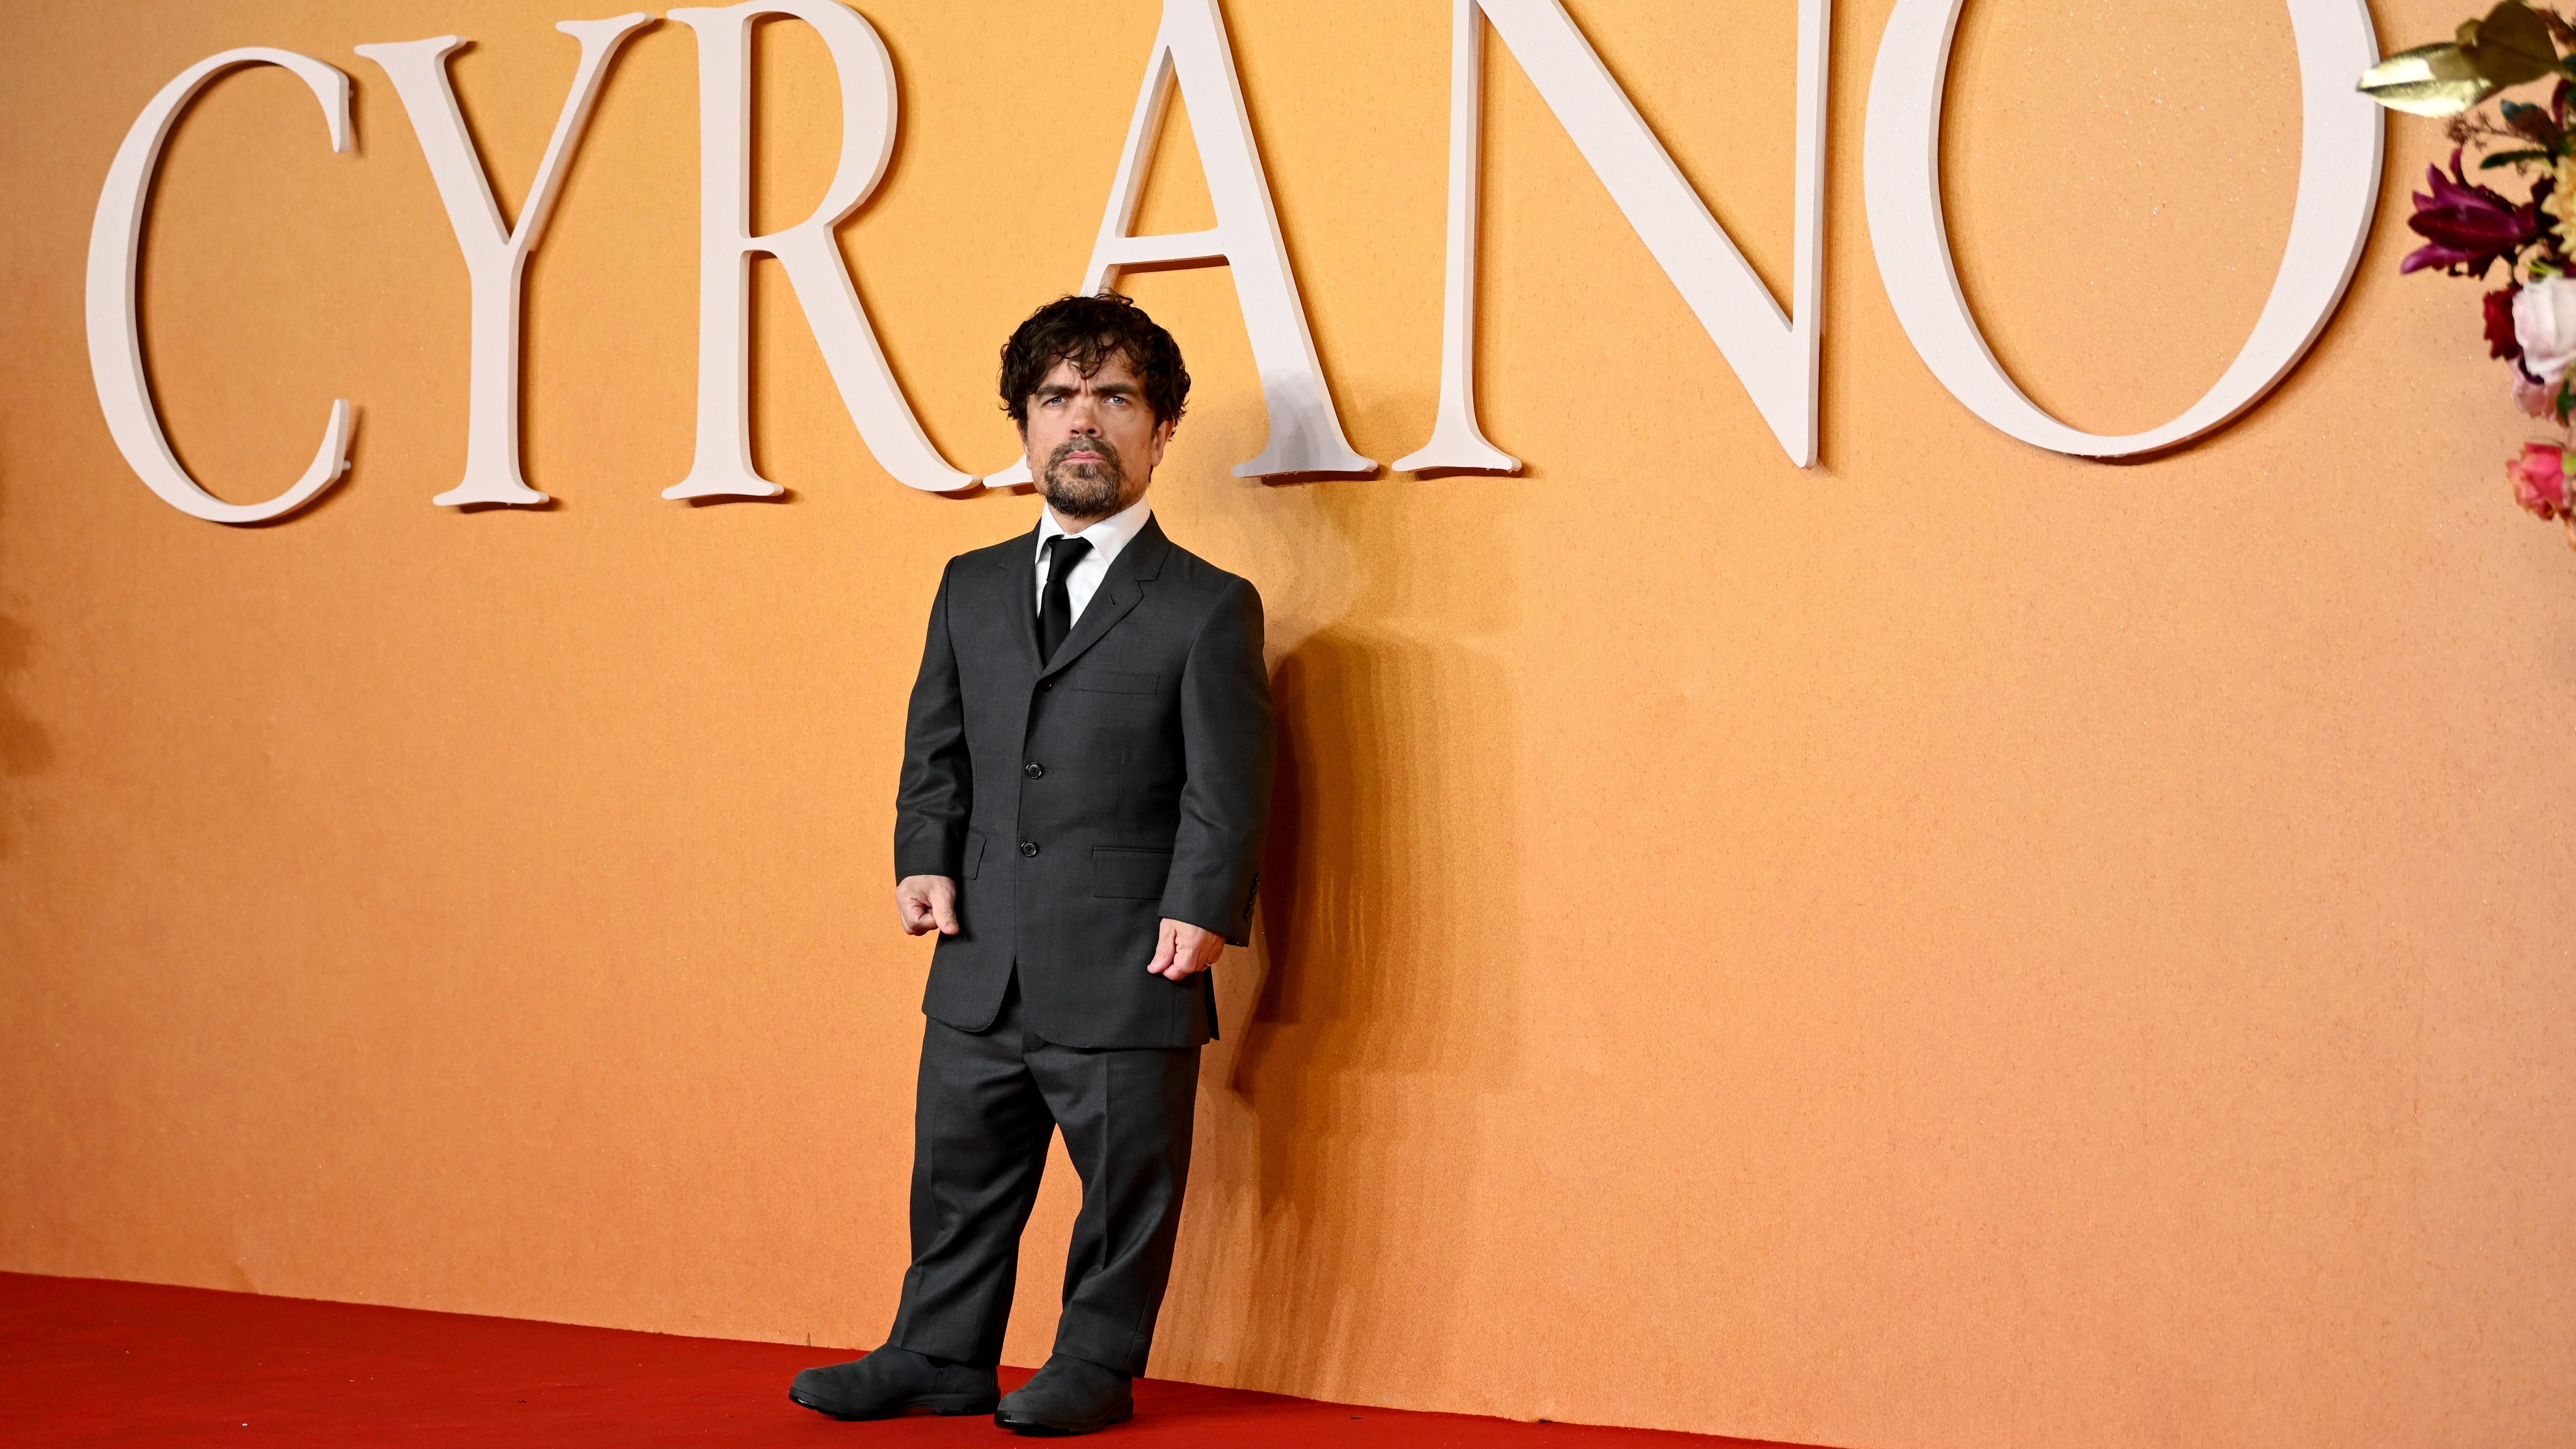 Ever the class act, Peter Dinklage defends Game Of Thrones’ final season